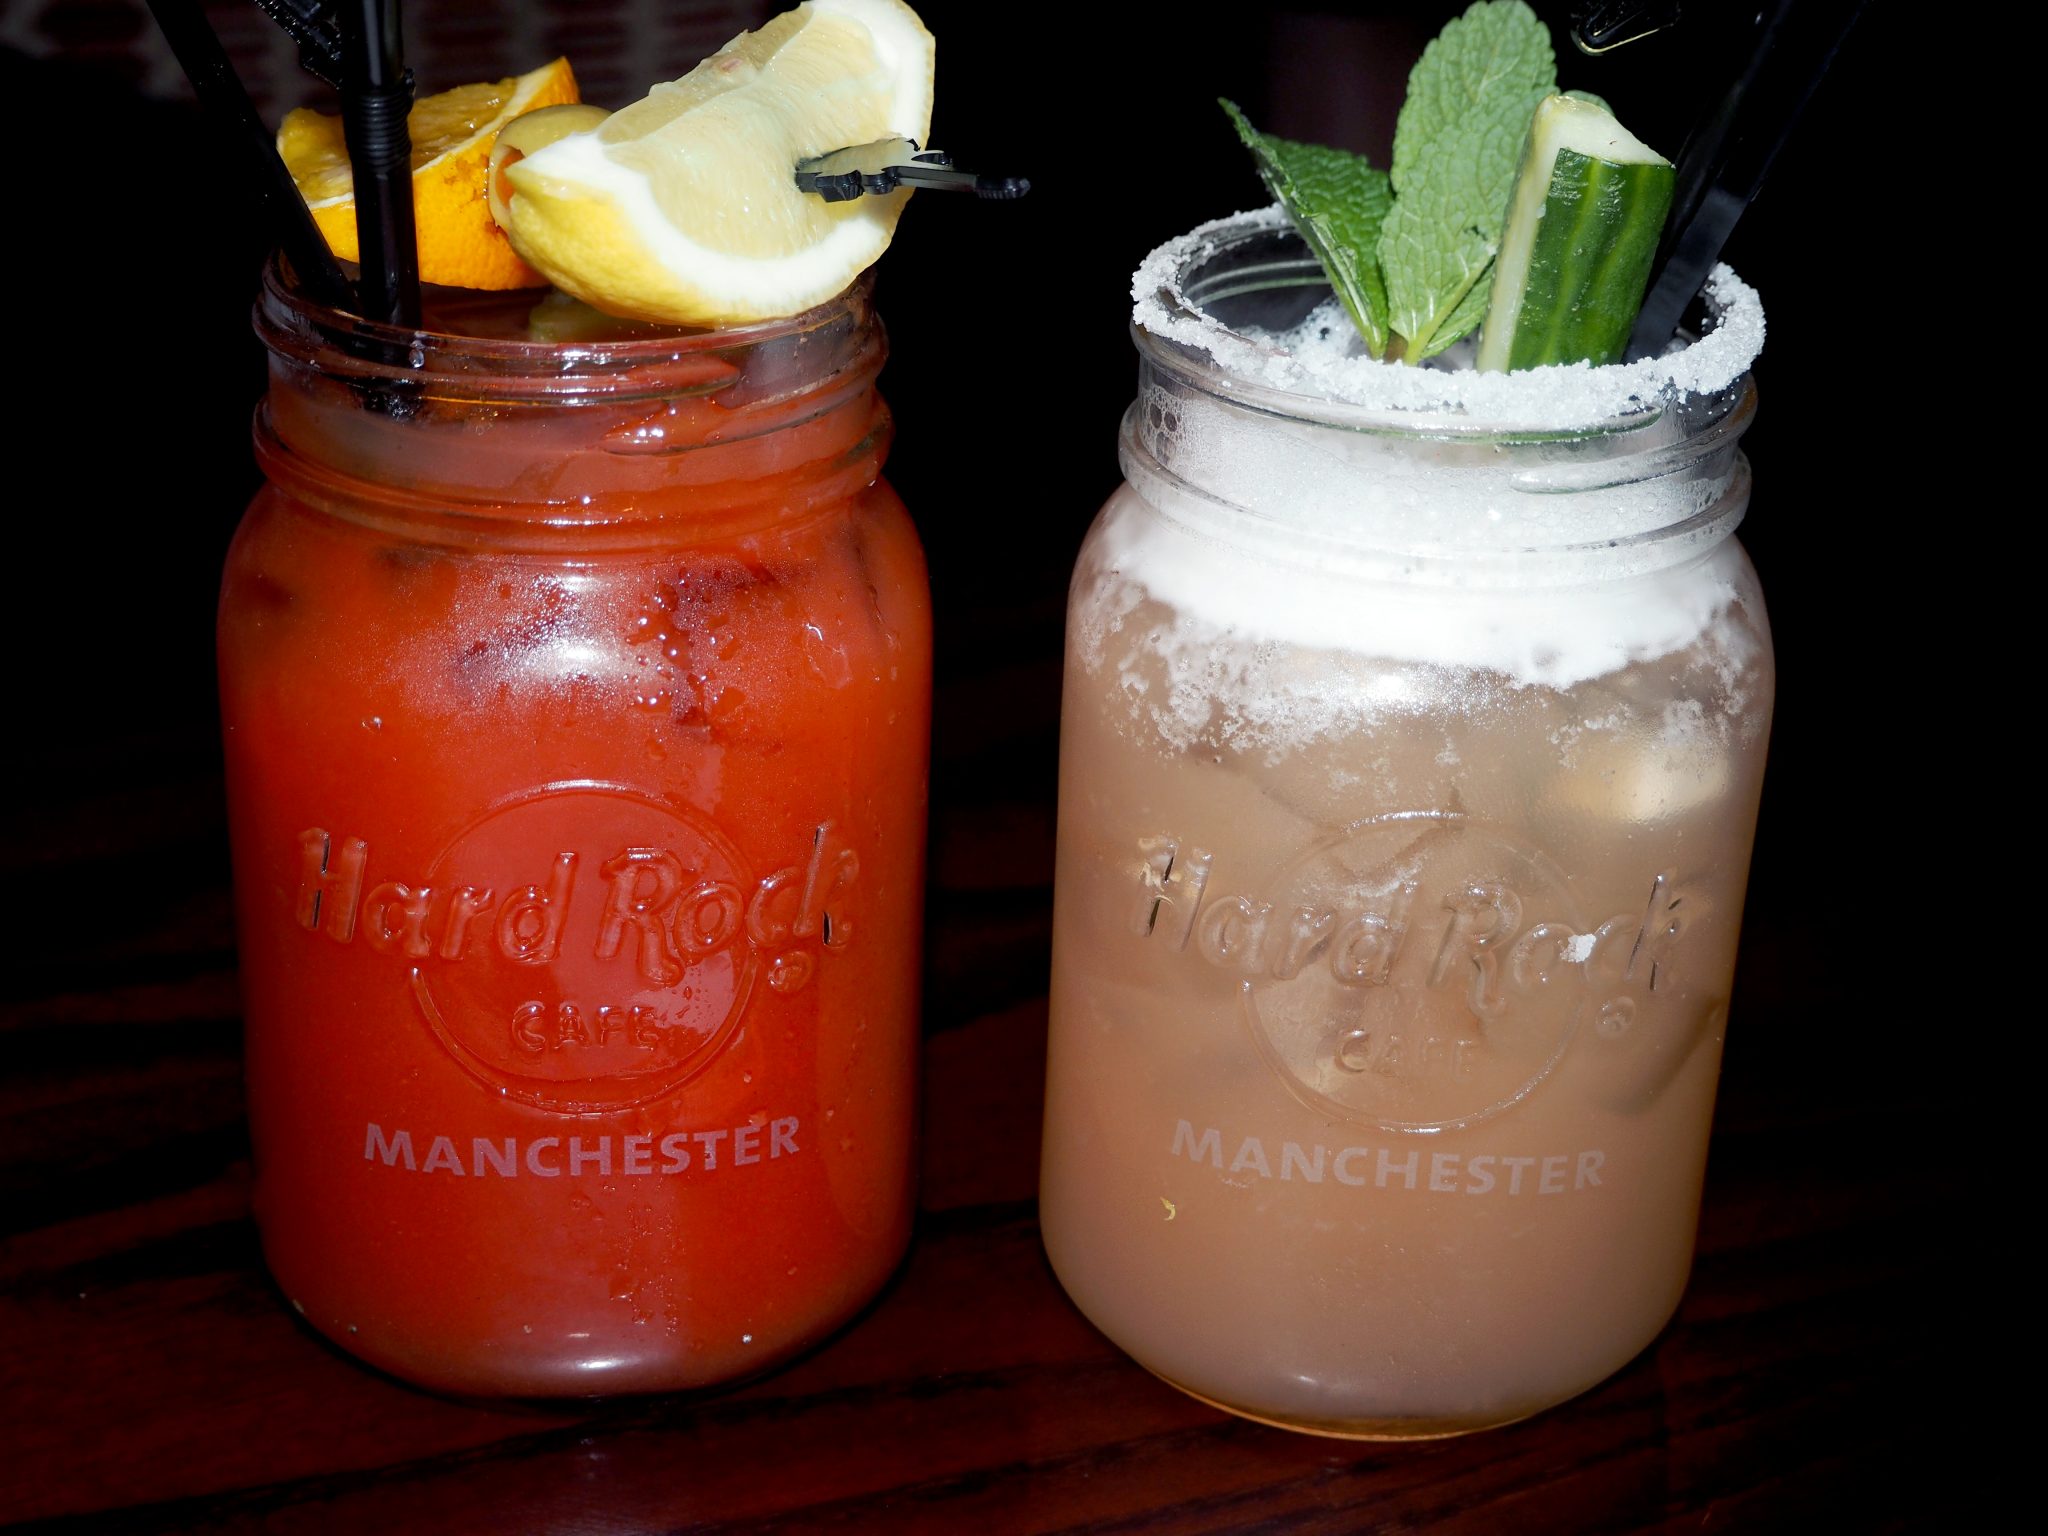 Laura Kate Lucas - Manchester Fashion, Food and Lifestyle Blogger | Hard Rock Cafe Halloween Burger and Bold Sips Autumn Cocktail Menu